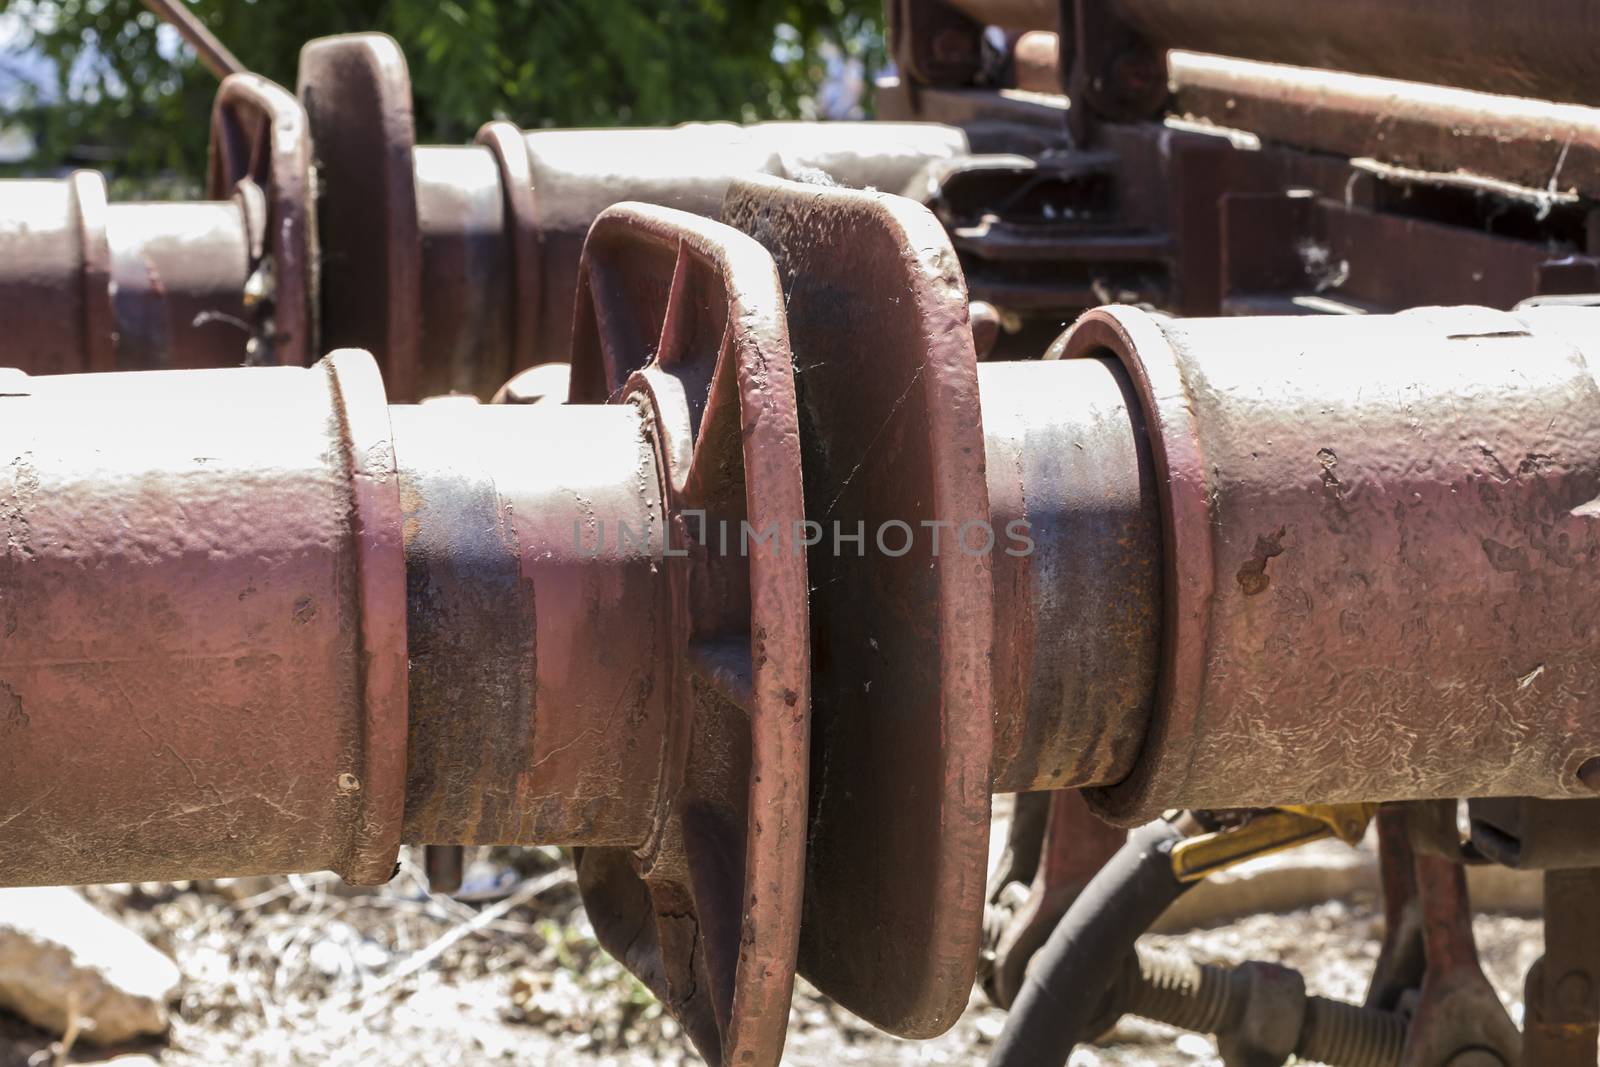 old freight train, metal machinery details